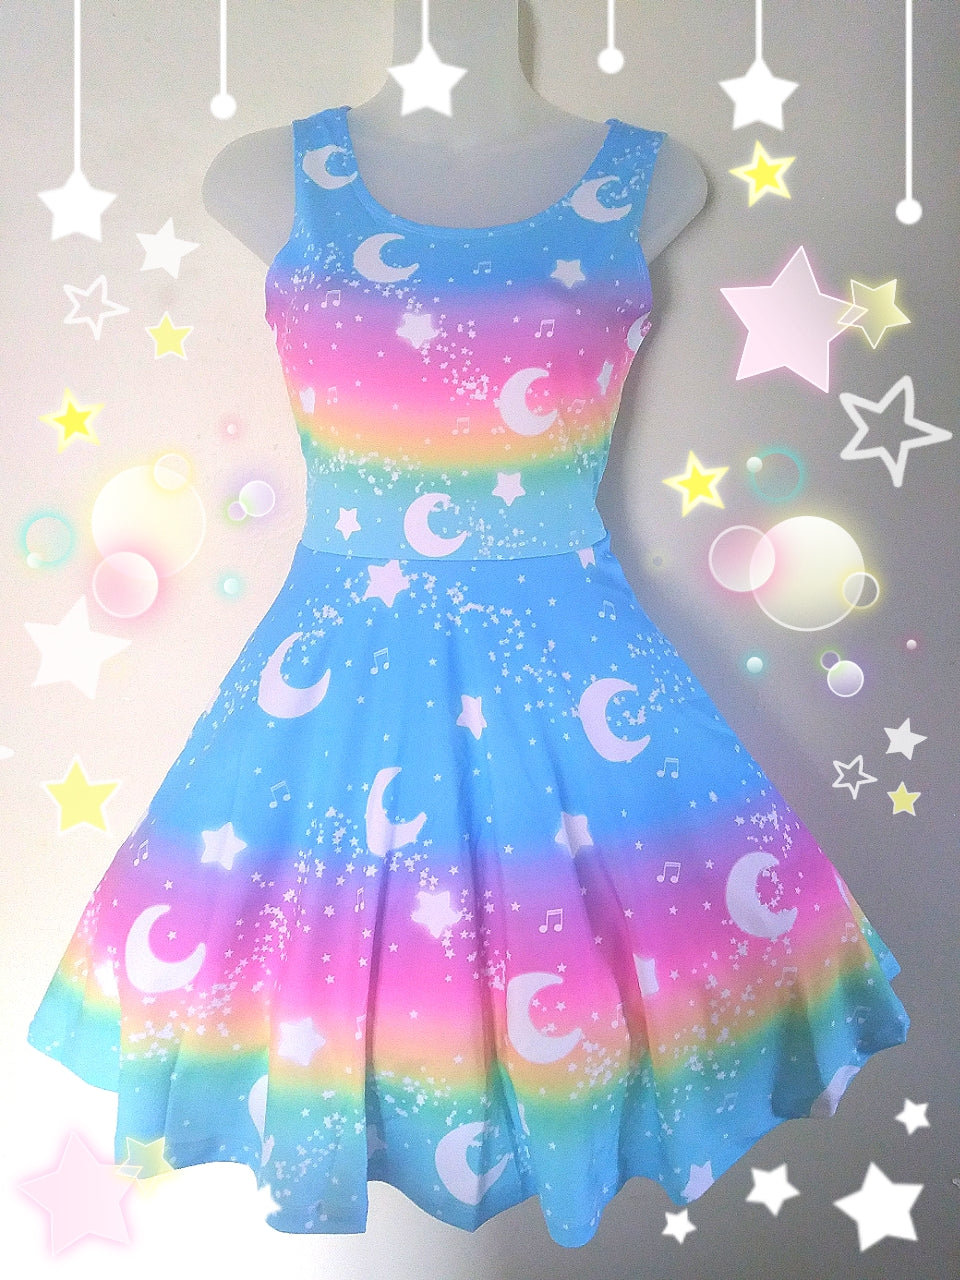 Magical Fairy Time Skater Dress - Rainbow Sunny Day [made to order]